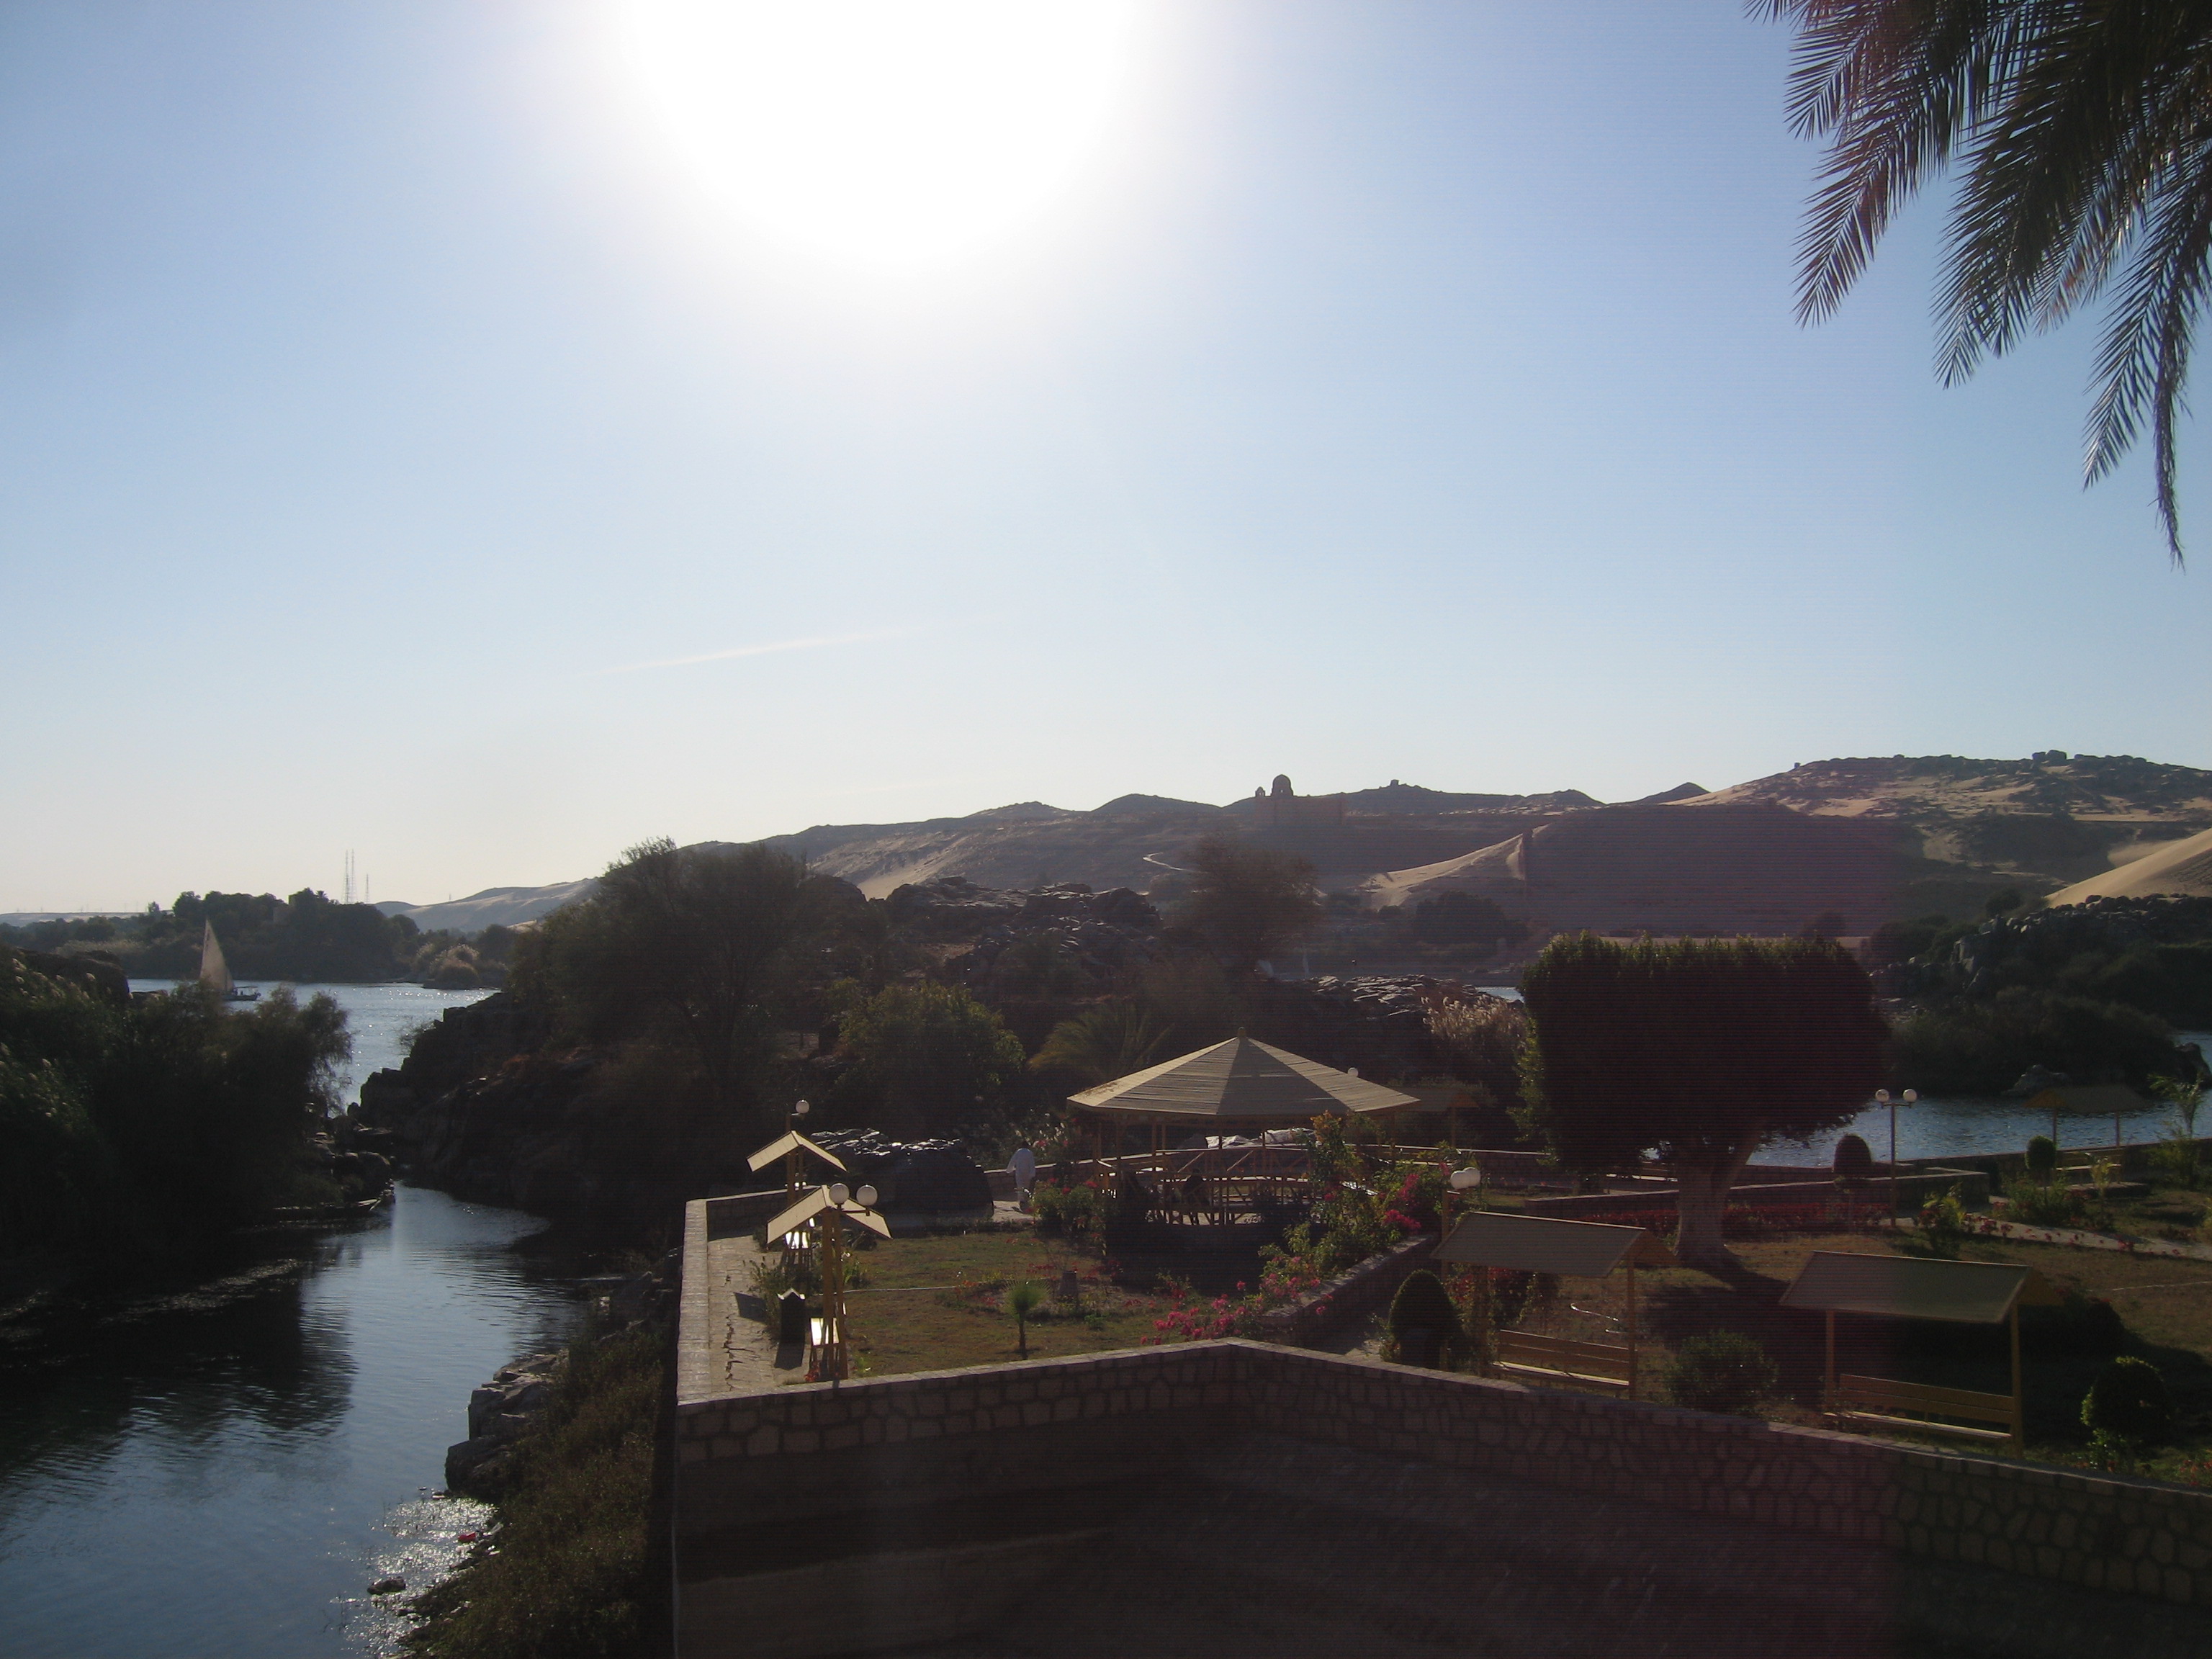 Sailing Egypt’s Nile River on an Ancient Felucca